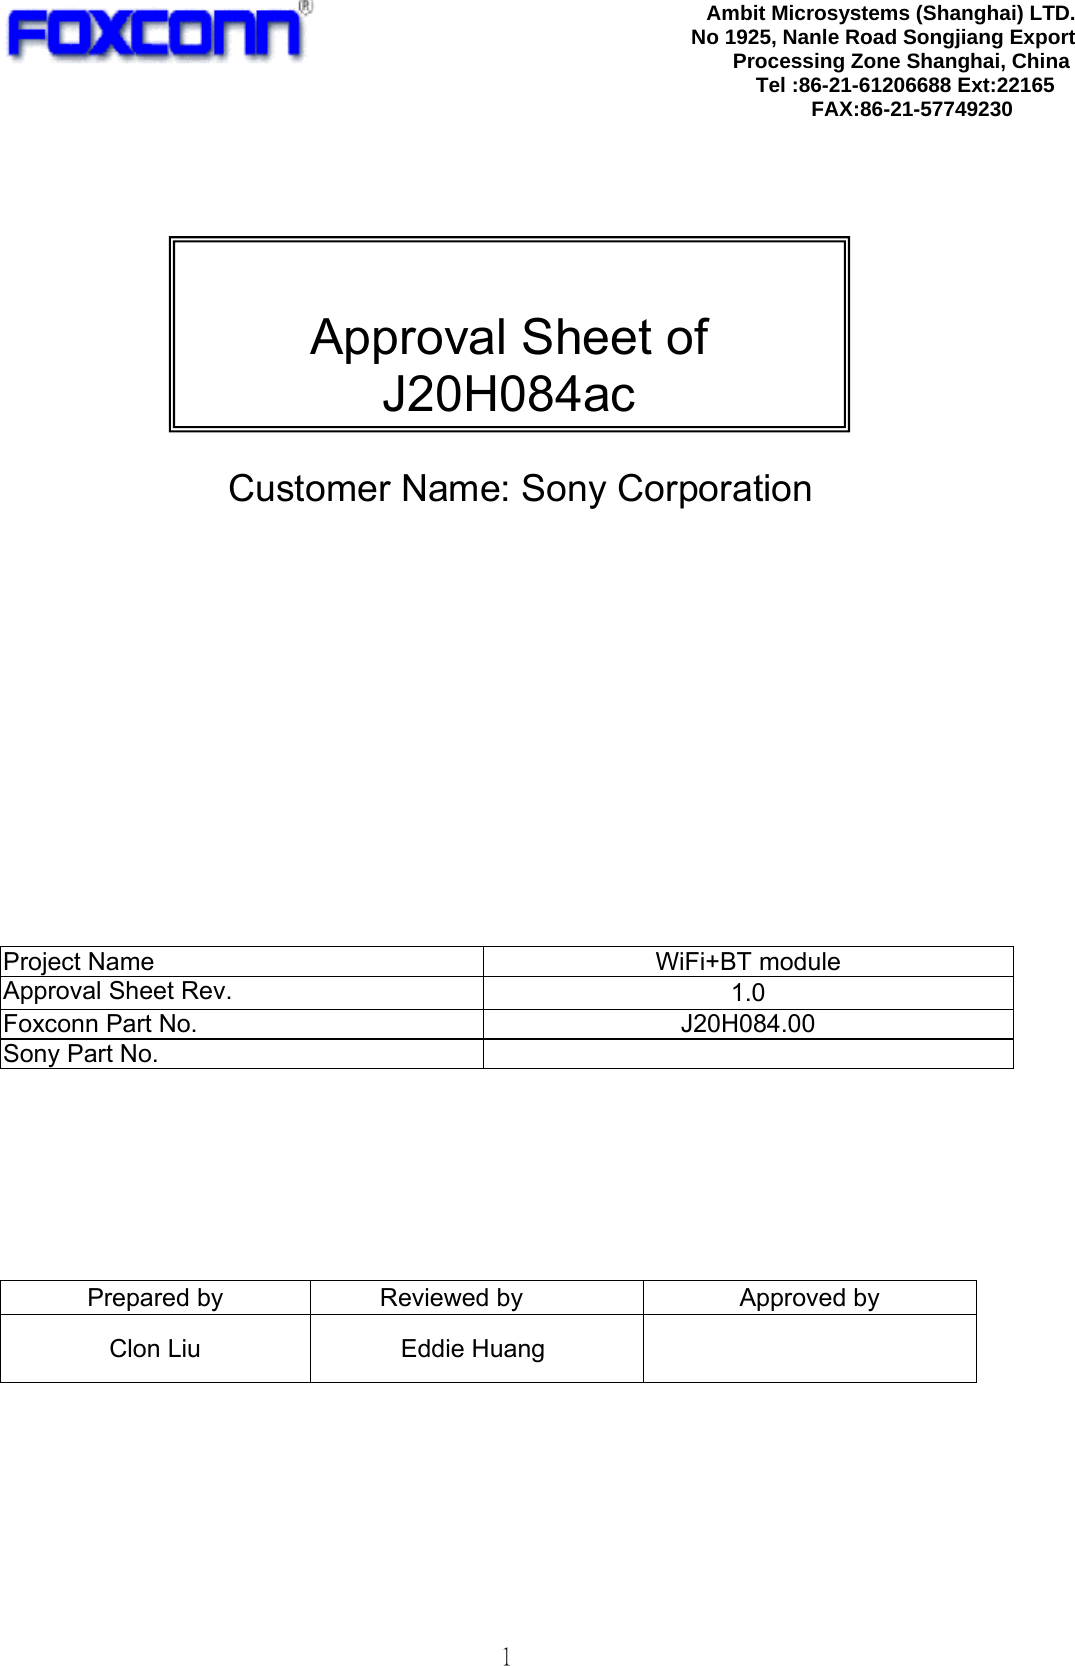   1             Customer Name: Sony Corporation               Project Name  WiFi+BT module Approval Sheet Rev.  1.0 Foxconn Part No.  J20H084.00 Sony Part No.          Prepared by  Reviewed by  Approved by Clon Liu  Eddie Huang        Ambit Microsystems (Shanghai) LTD.No 1925, Nanle Road Songjiang Export Processing Zone Shanghai, China Tel :86-21-61206688 Ext:22165 FAX:86-21-57749230  Approval Sheet of J20H084ac